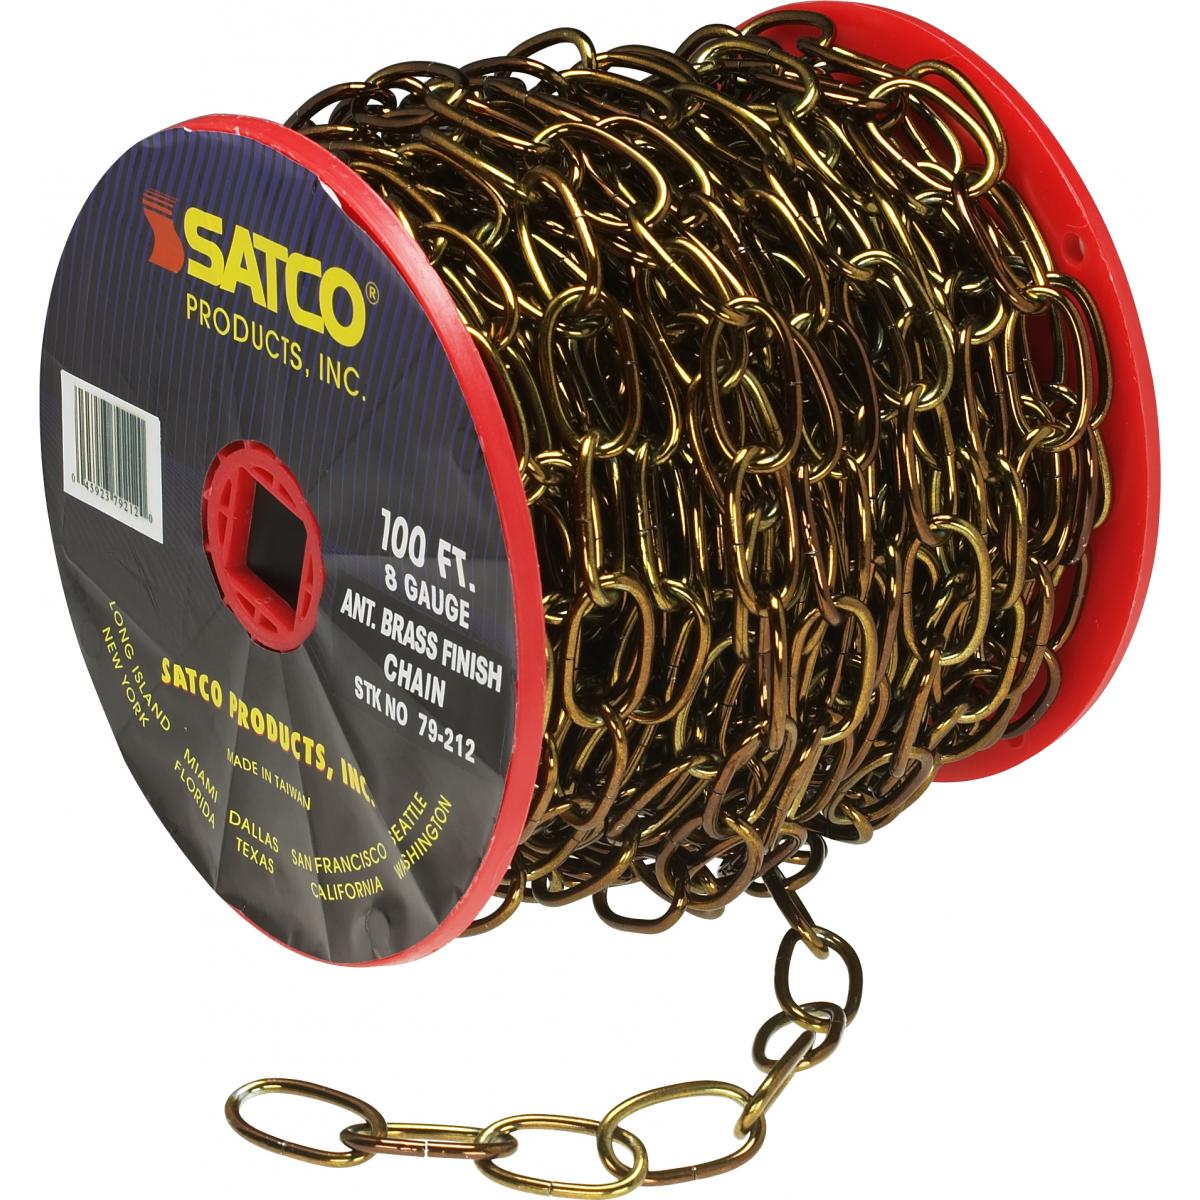 Satco 79-212 8 Ga. Chain Antique Brass Finish 100 ft. to Reel 1 Reel To Master 35lbs Max